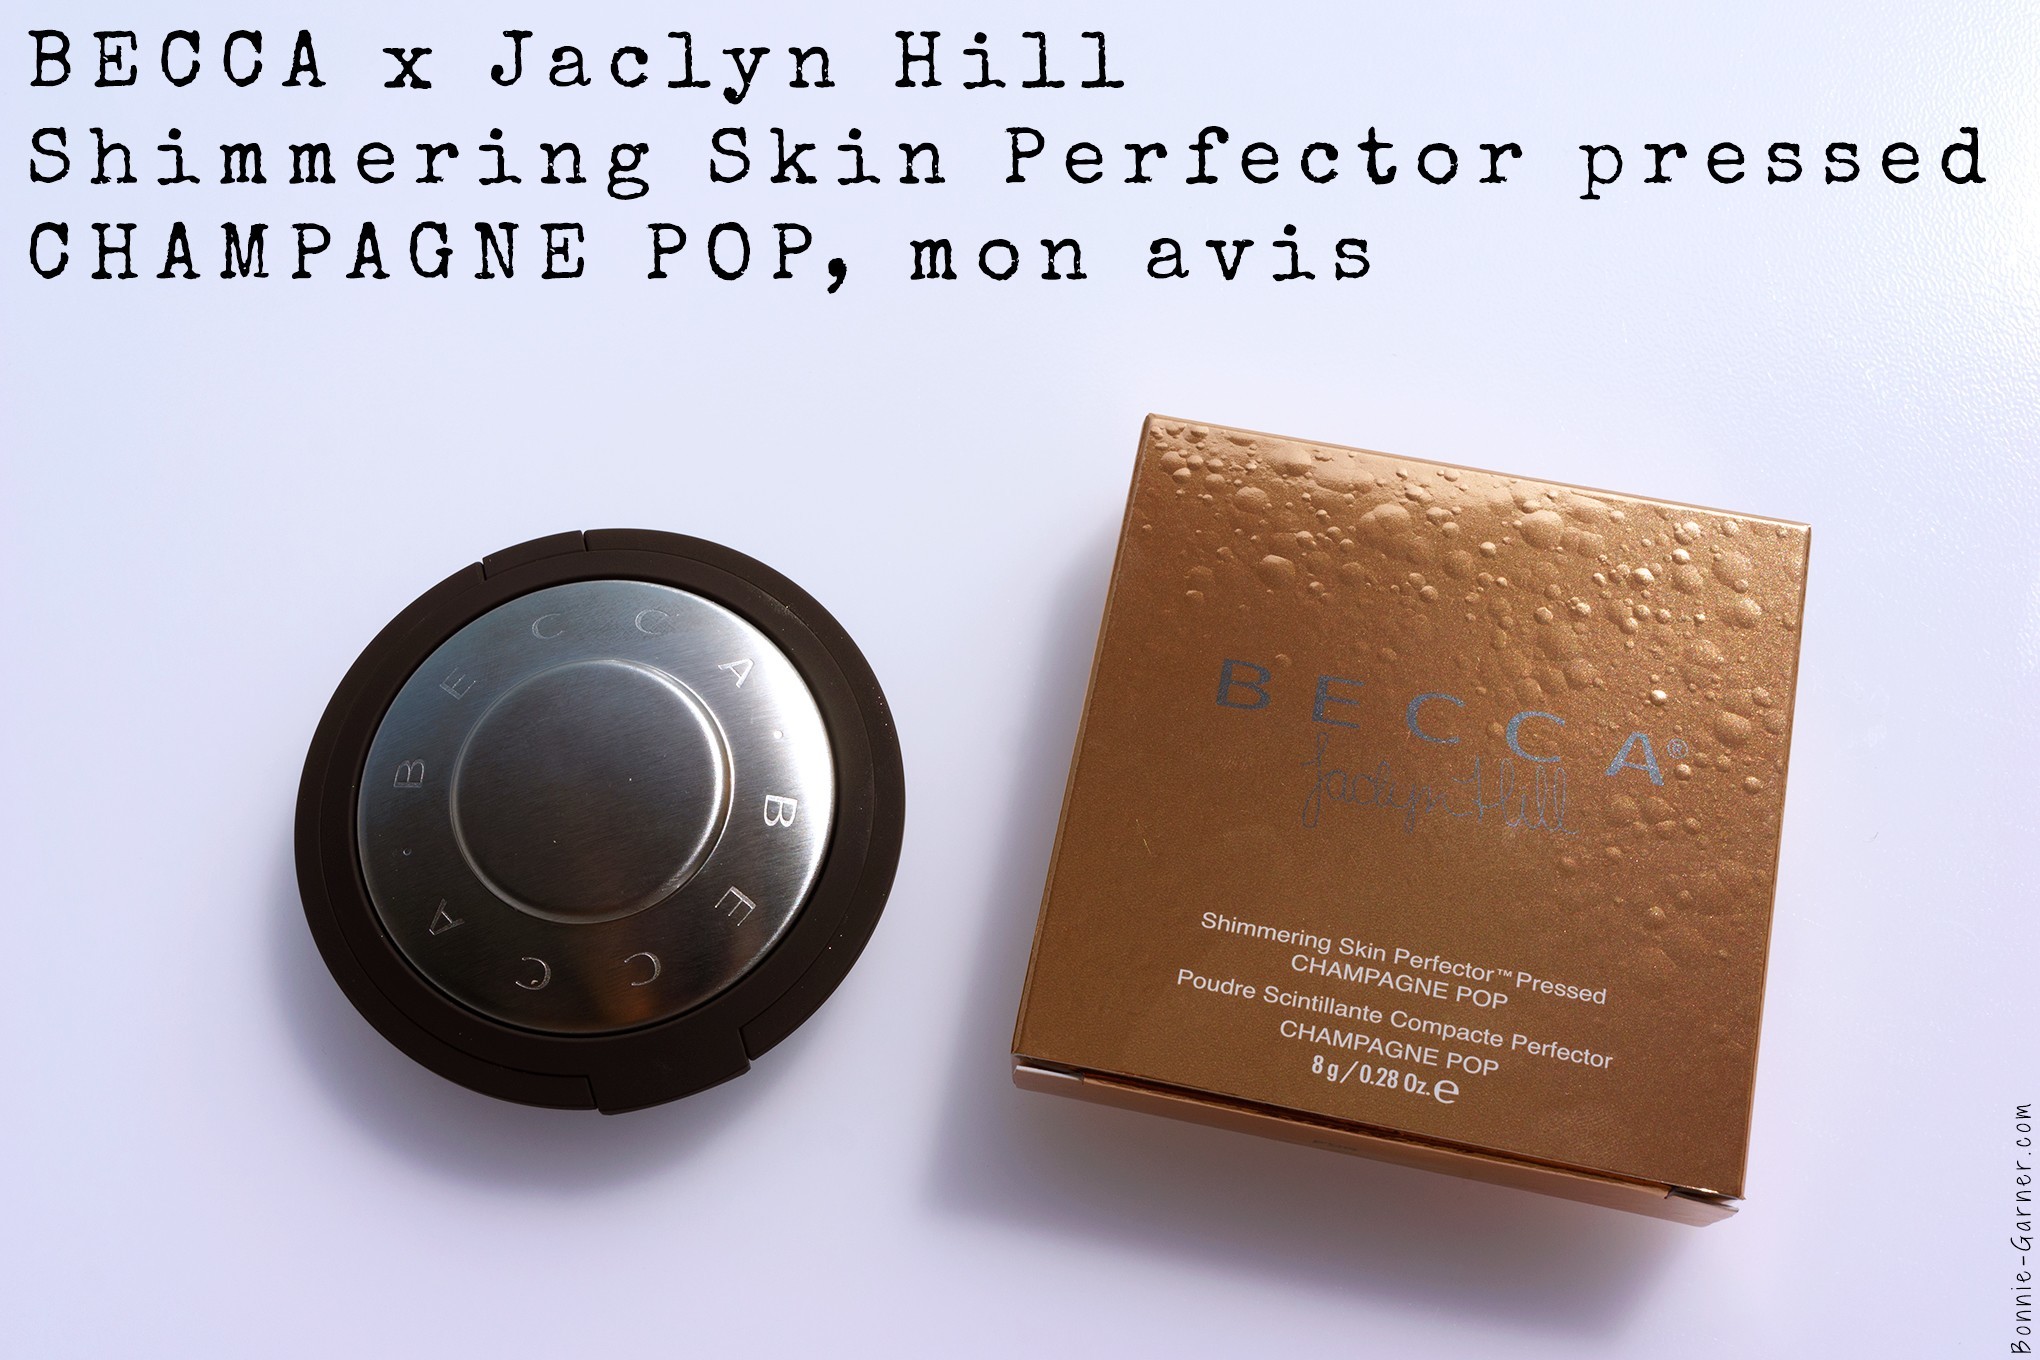 Becca x Jaclyn Hill Shimmering Skin Perfector Pressed Champagne Pop mon avis